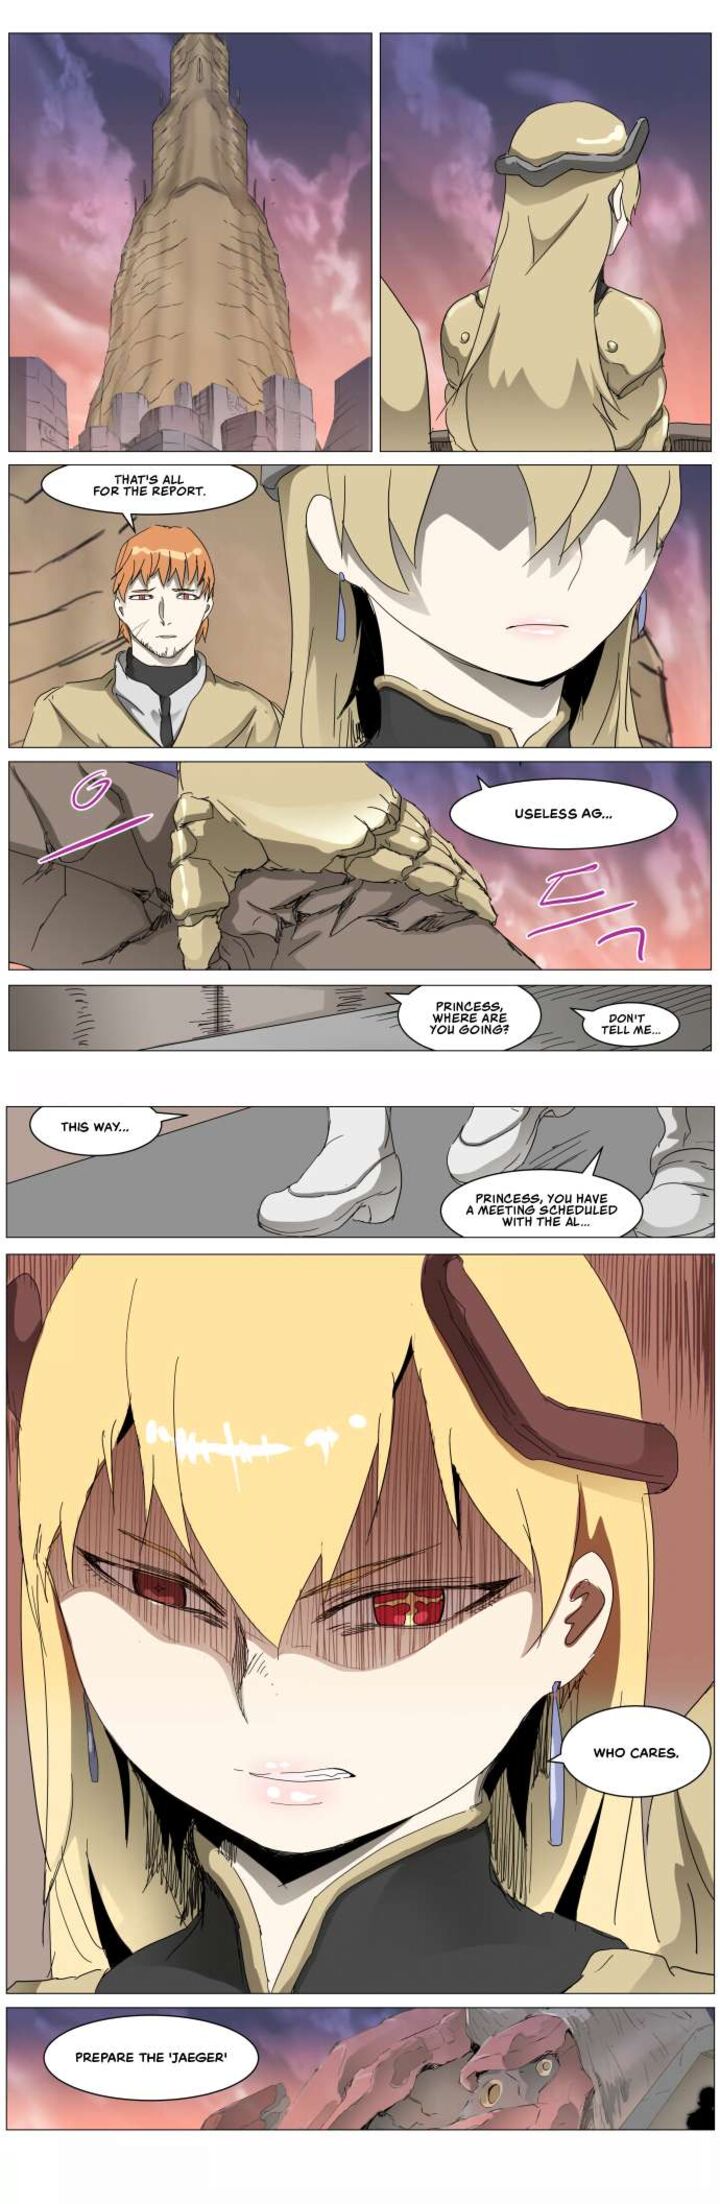 Knight Run Chapter 289 Page 2